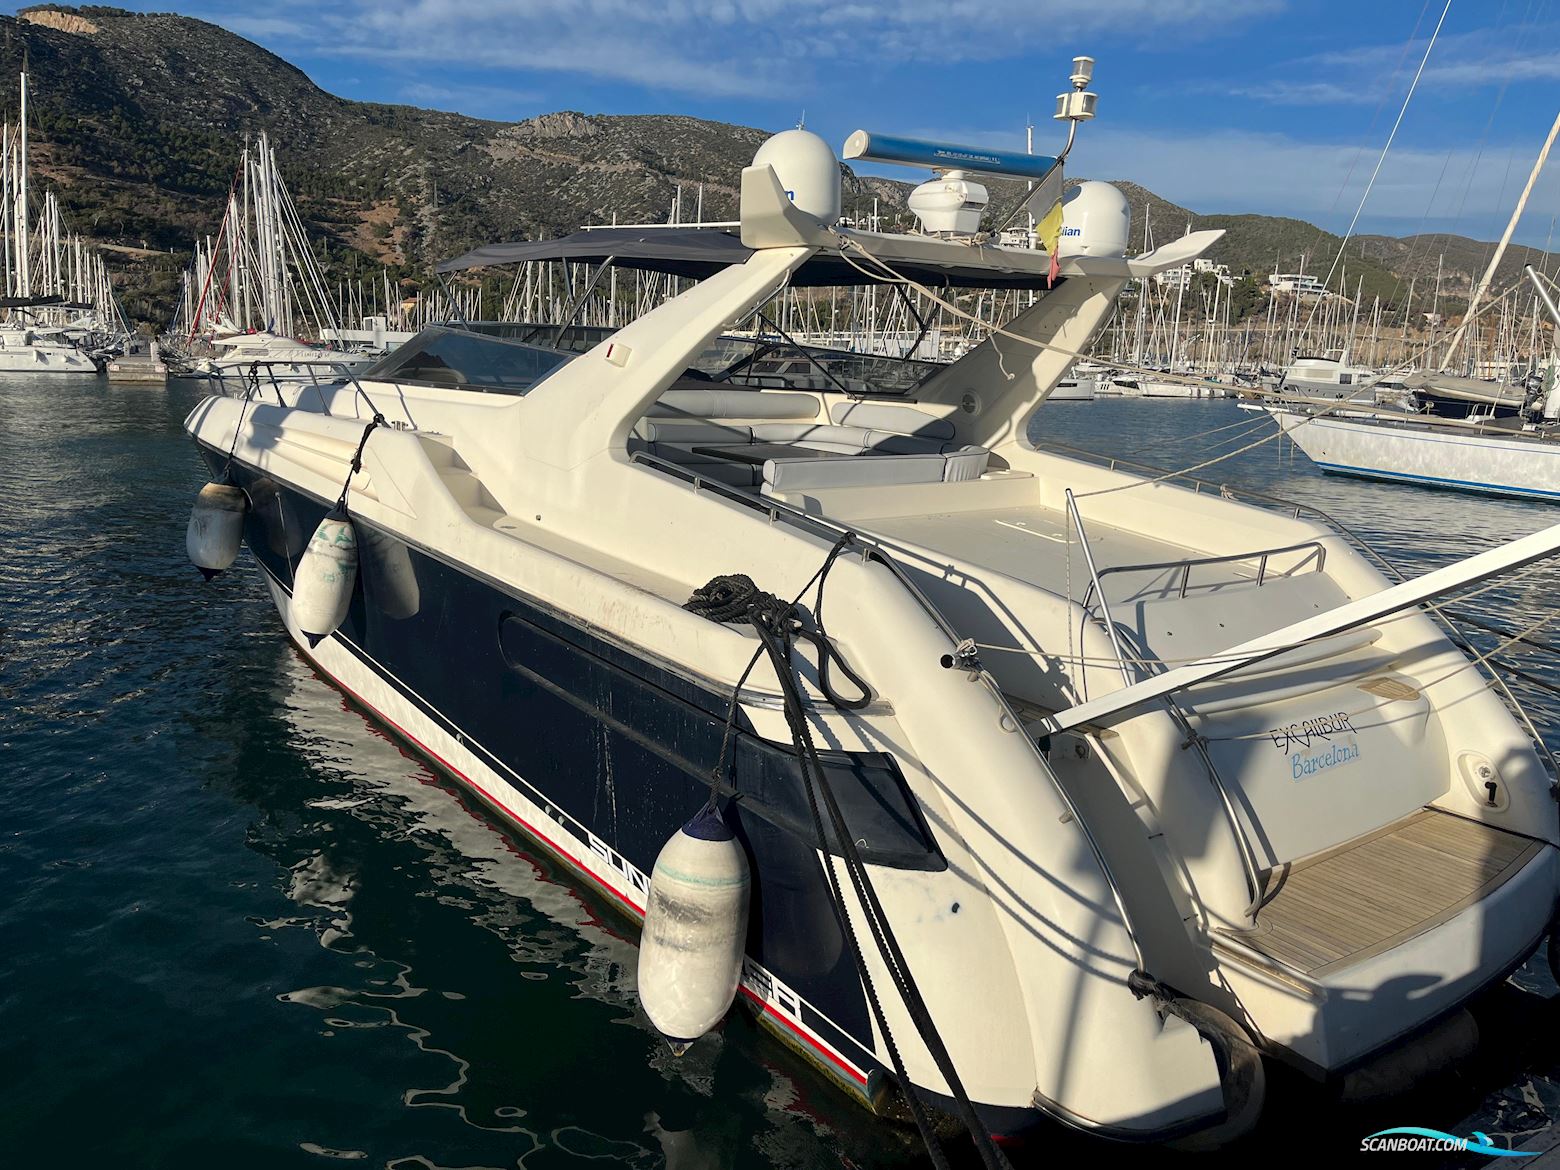 Sunseeker Camargue 55 Motor boat 1993, with Detroit engine, Spain